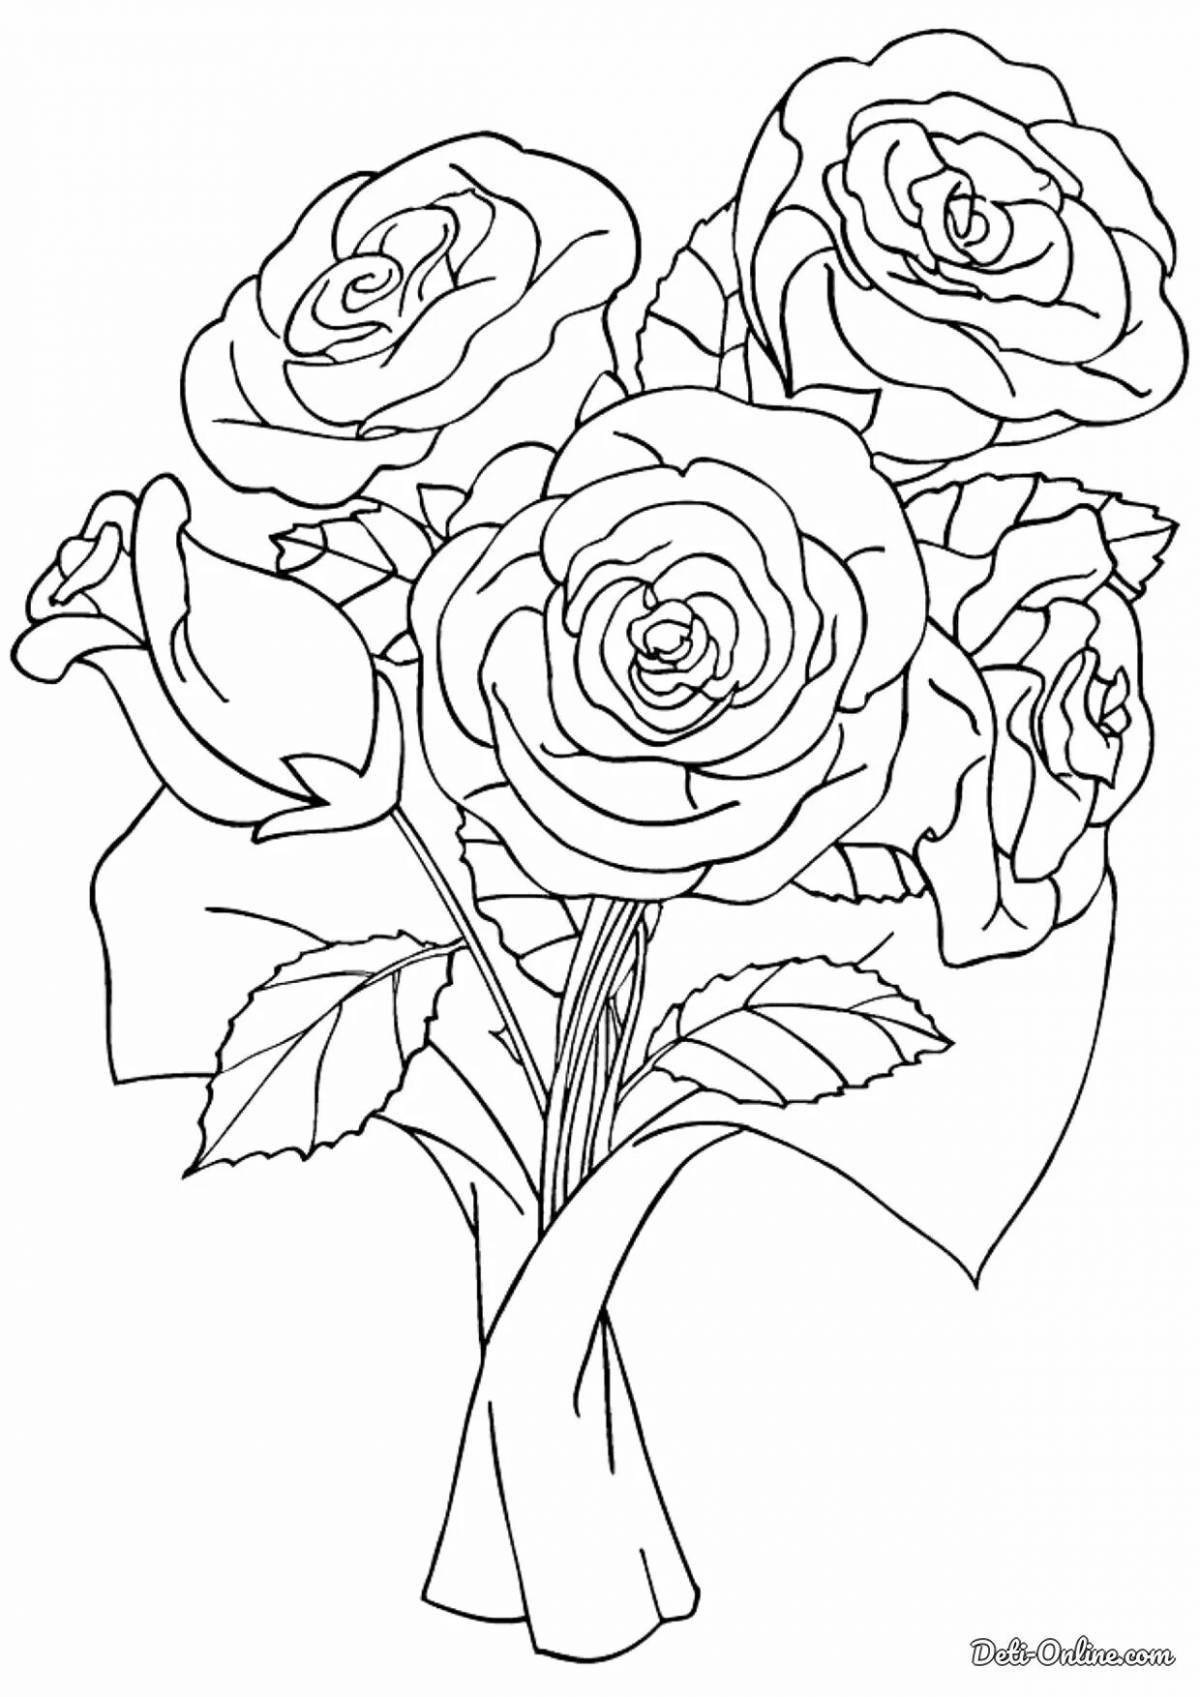 Glowing rose coloring page